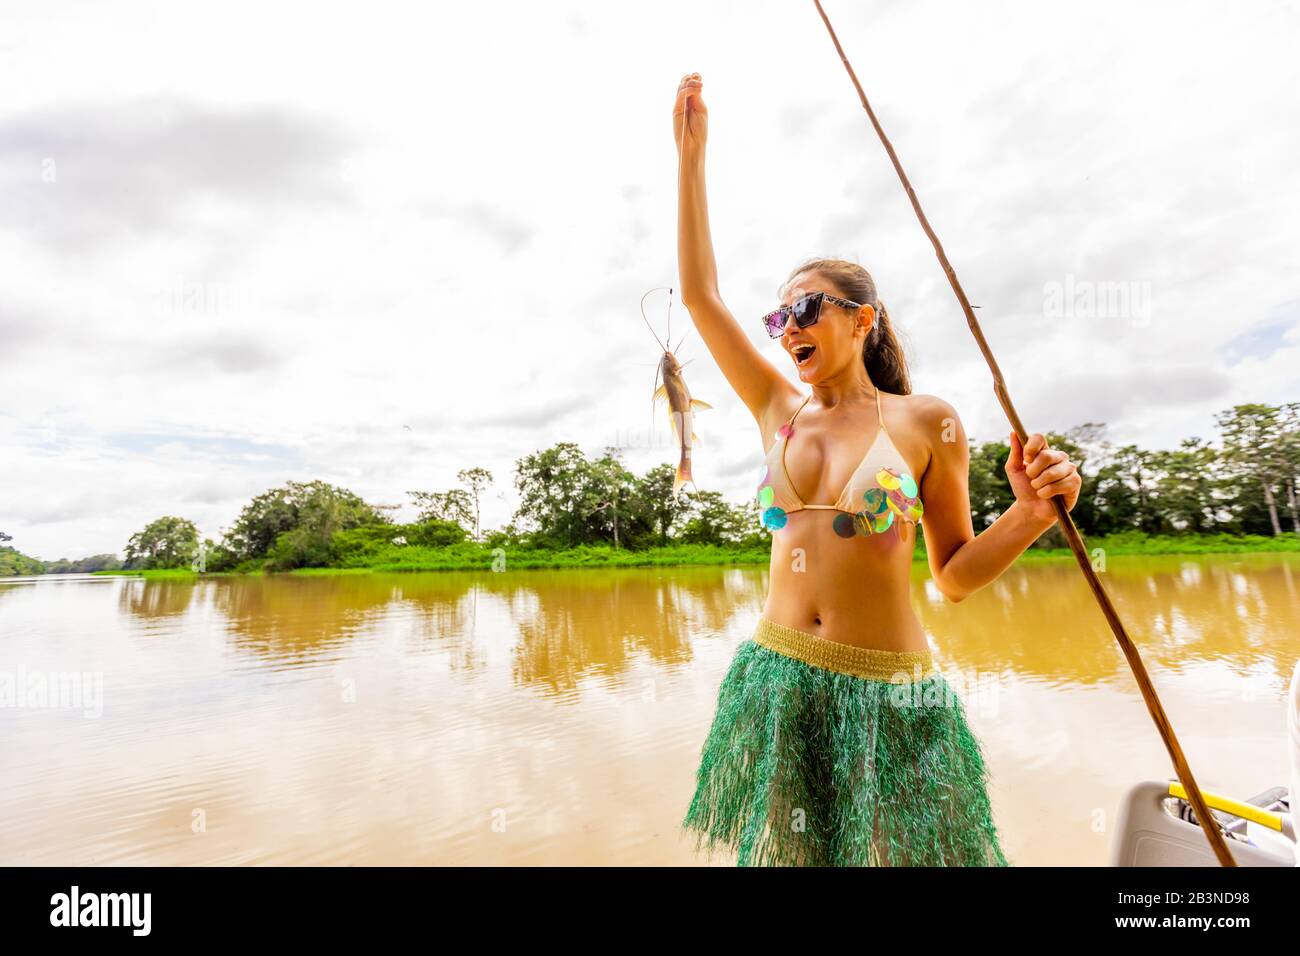 Woman showing her freshly caught fish from the Amazon River, Peru, South America Stock Photo